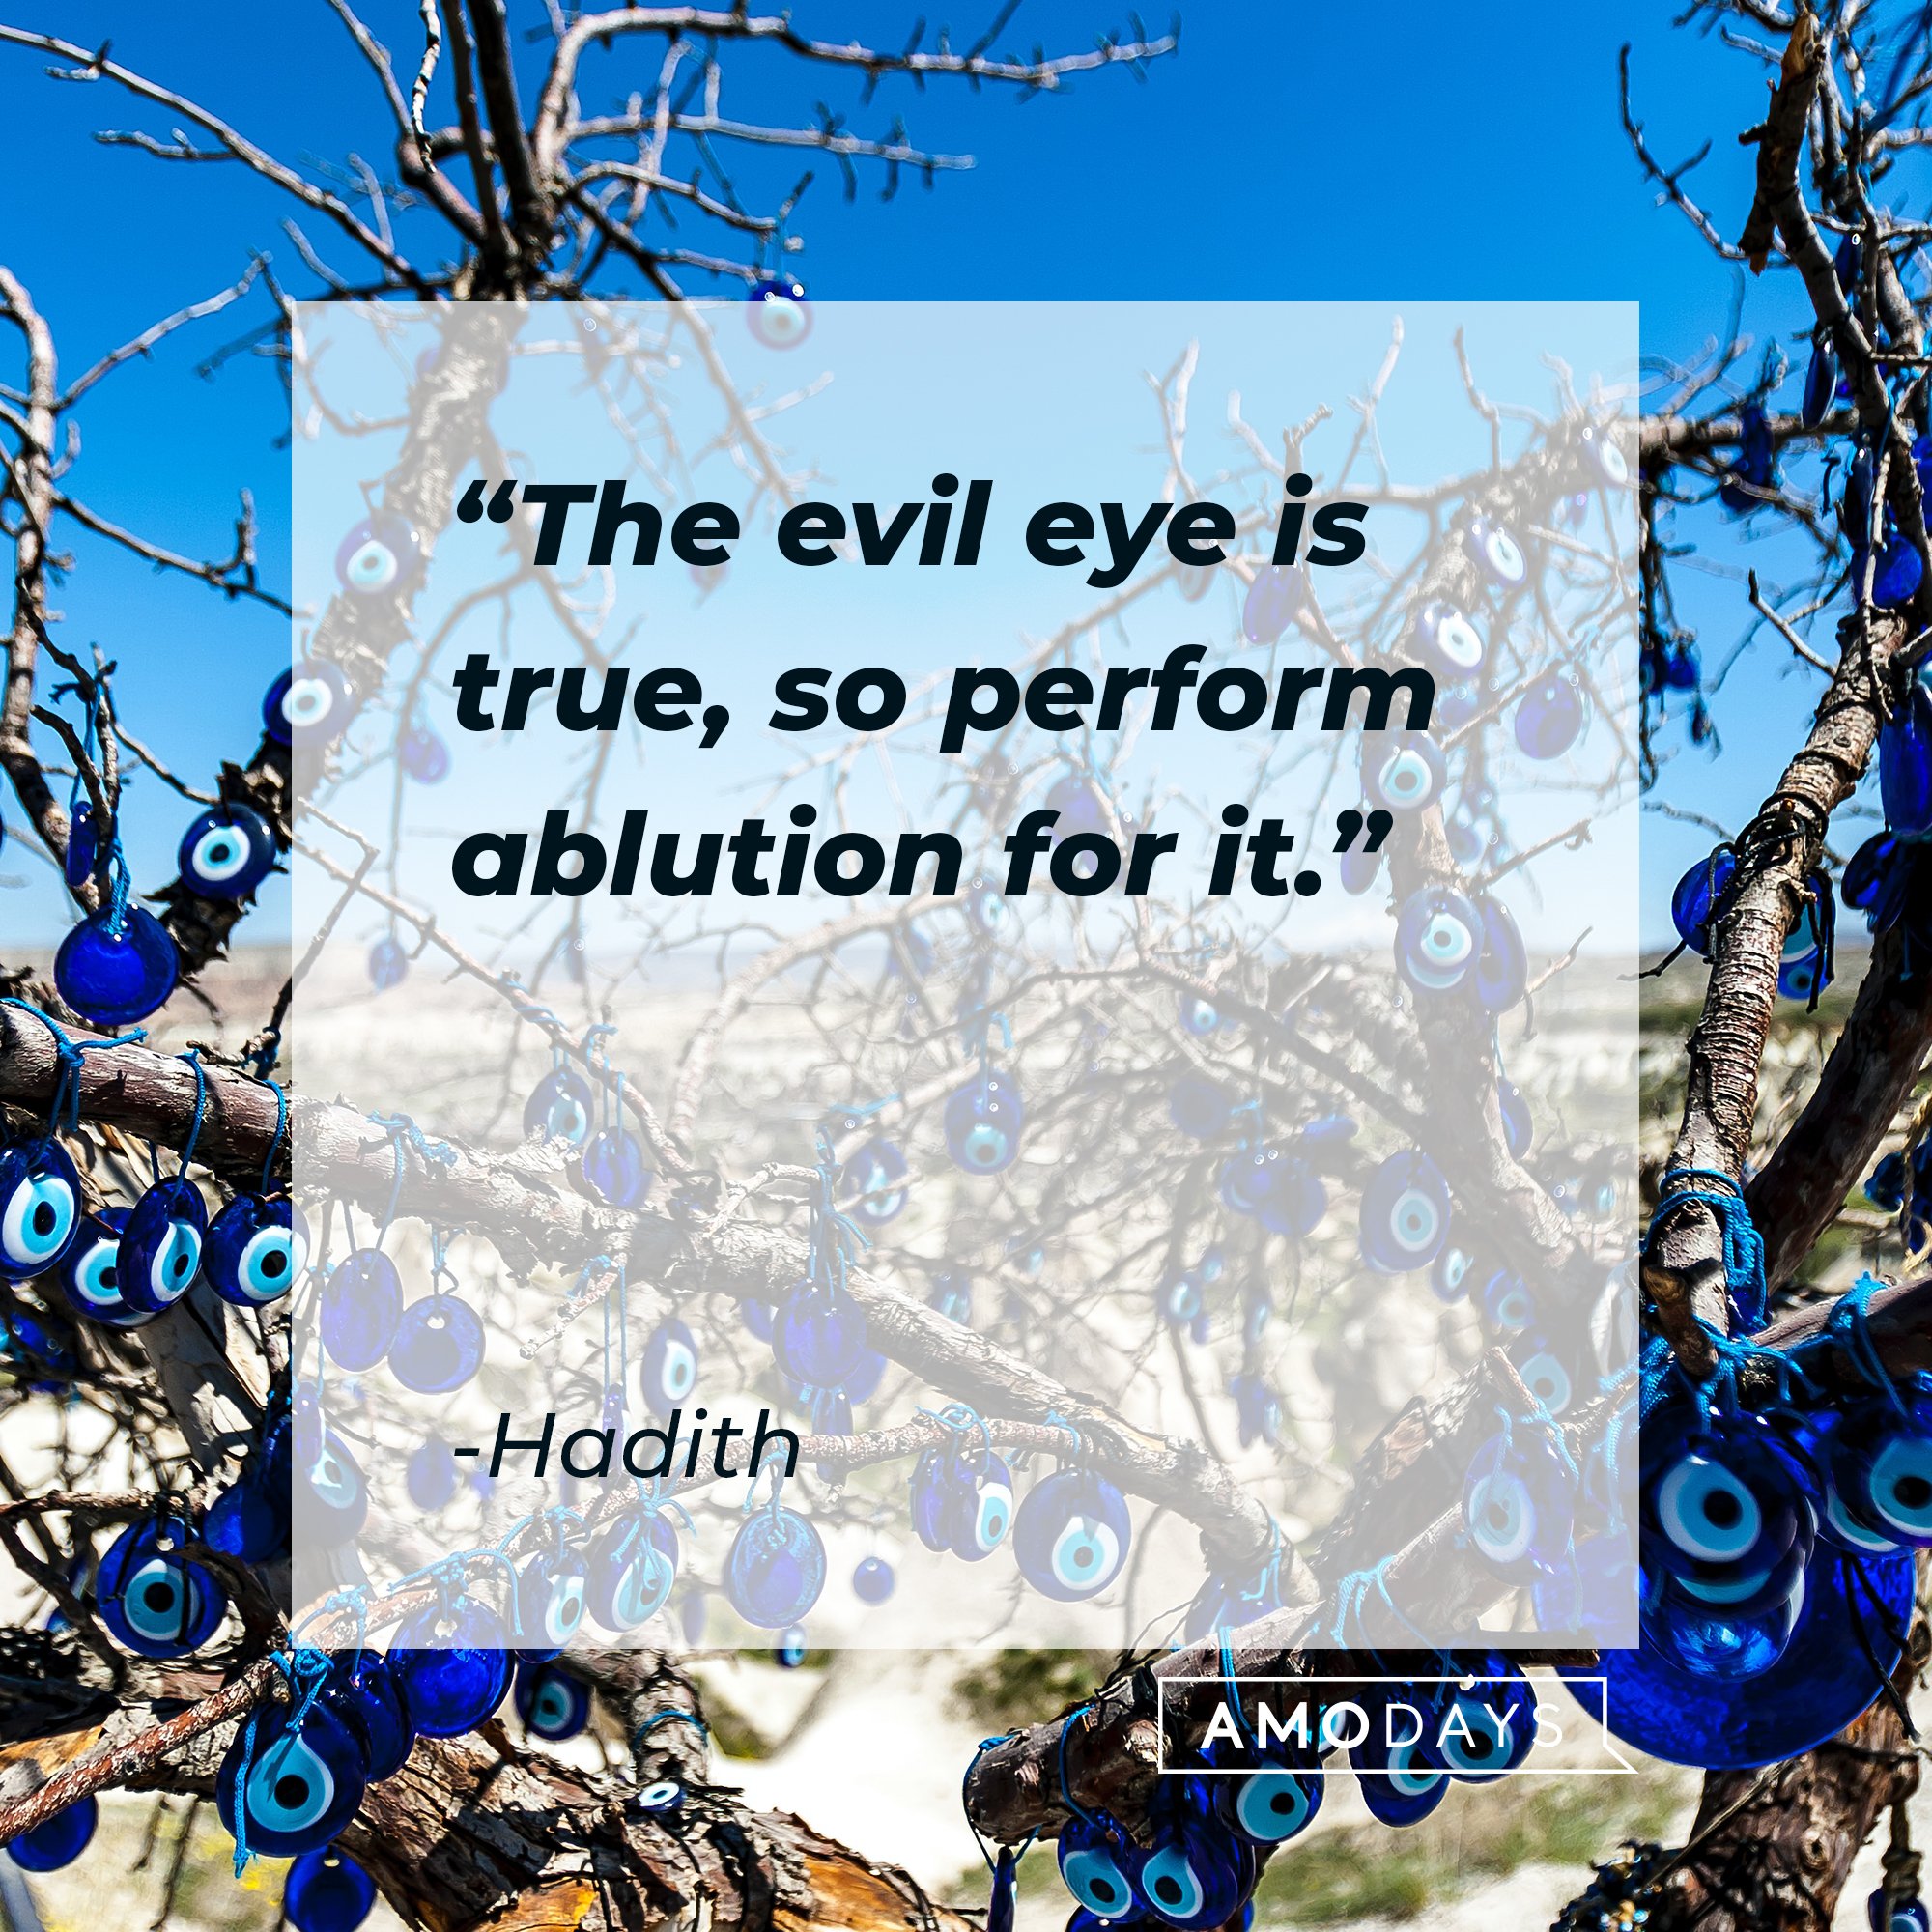 Hadith’s quote: "The evil eye is true, so perform ablution for it."  | Image: AmoDays